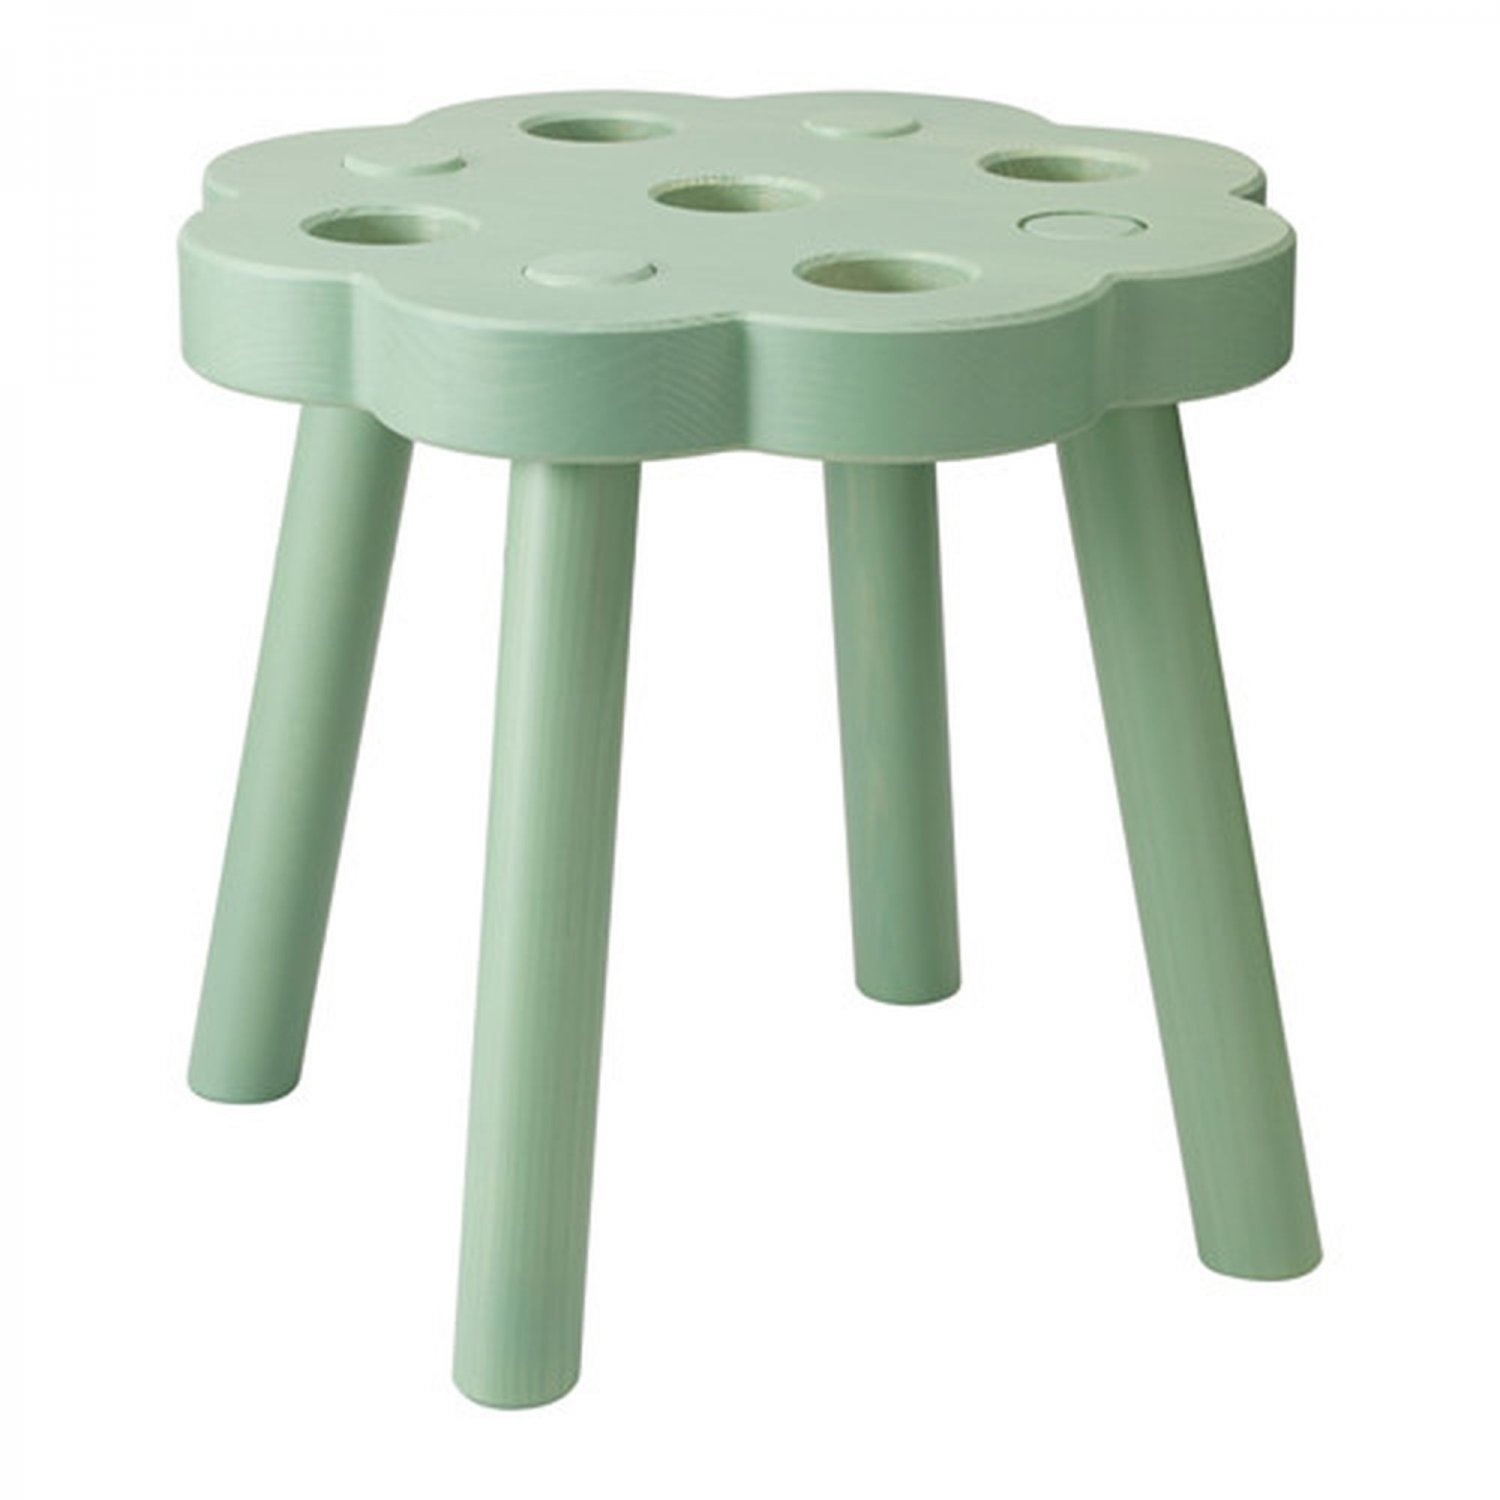 IKEA Ryssby GREEN Wooden STOOL Chair Footstool Solid Wood Scandinavian Country Swedish Xmas